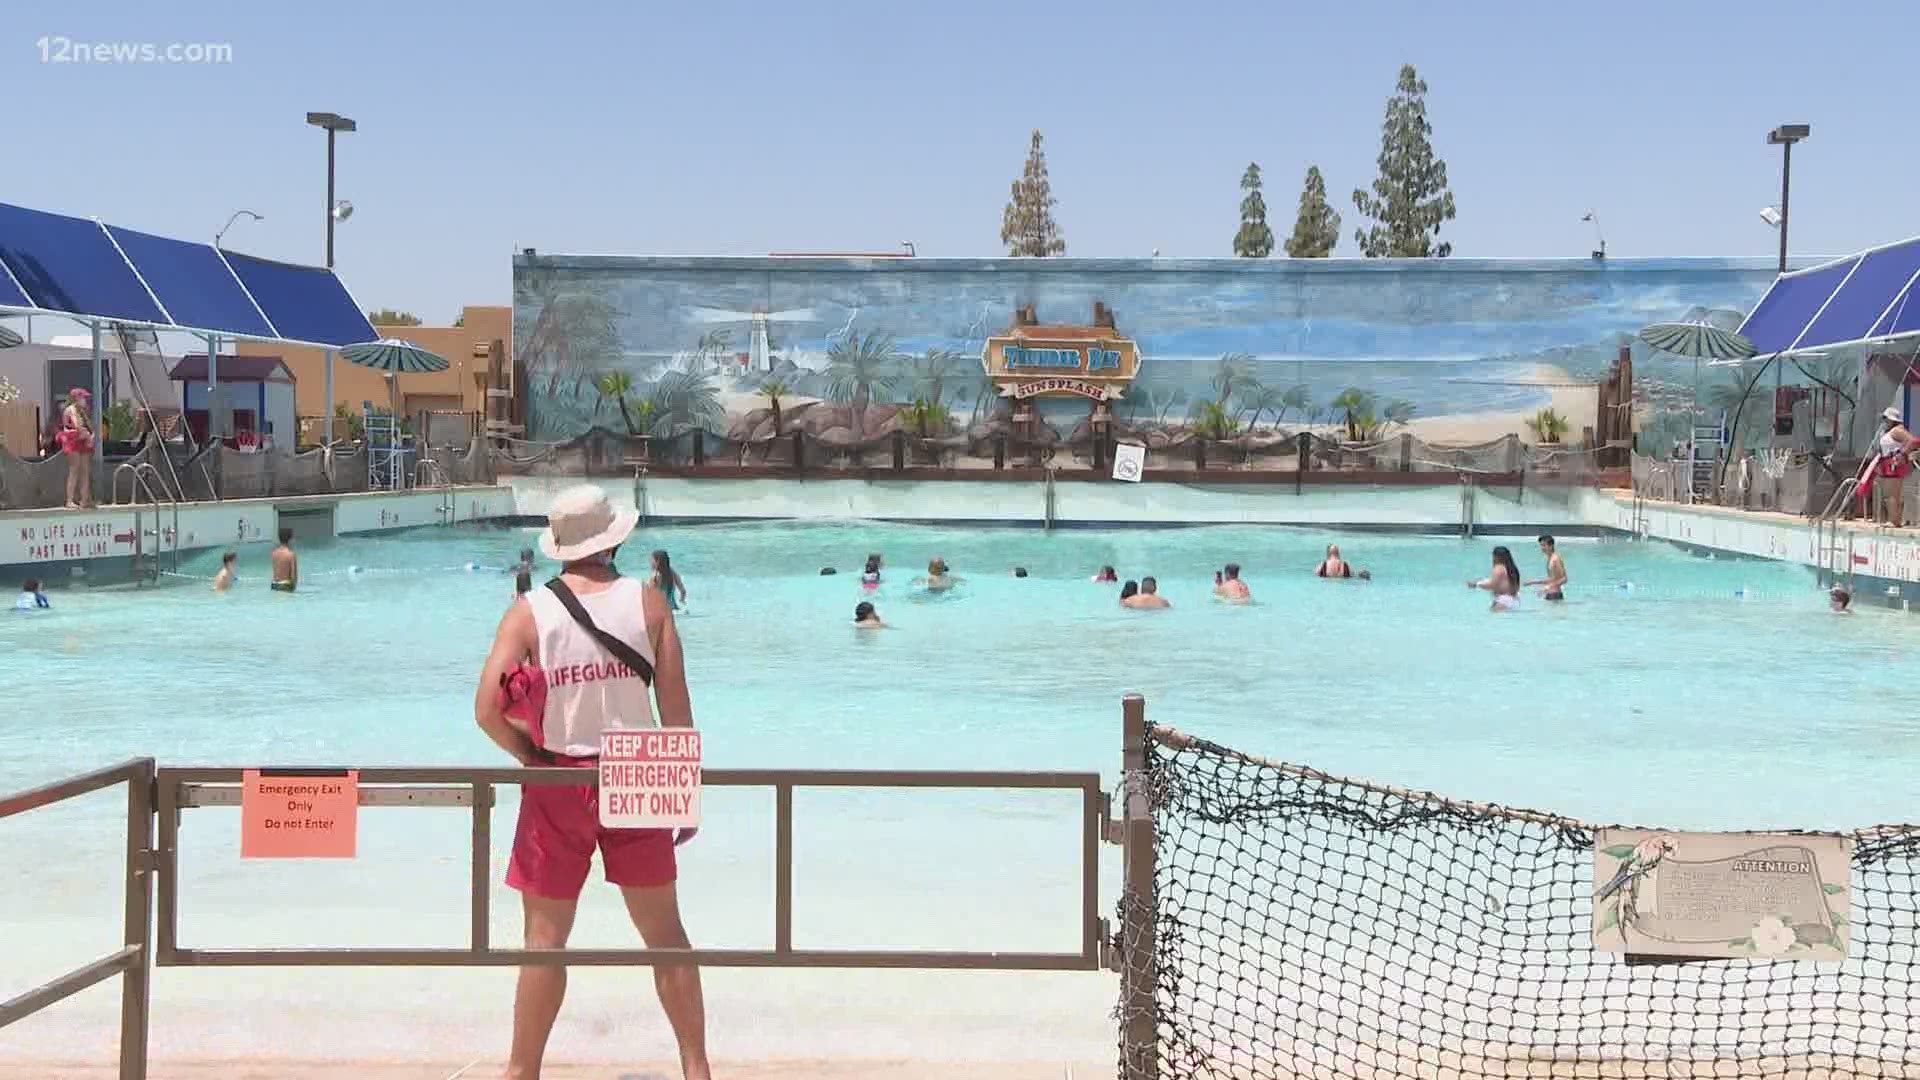 Sunsplash, a water park in Mesa, is reopening today. But there are questions about that process and the coronavirus safety measures that are in place.